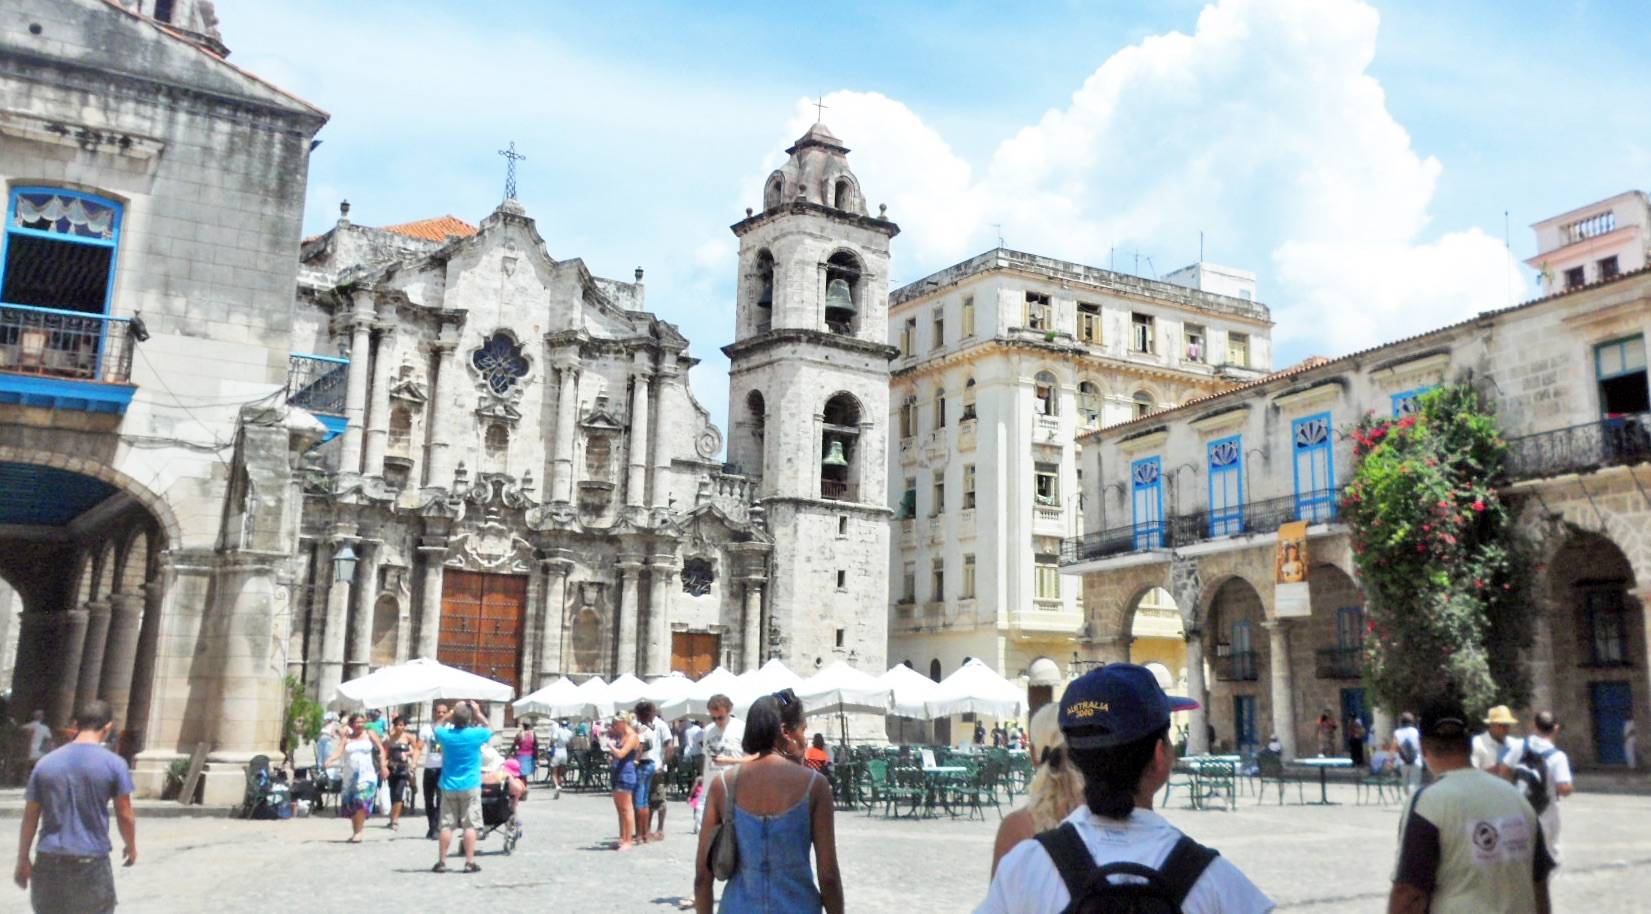 The Cathedral Square in Old Havana